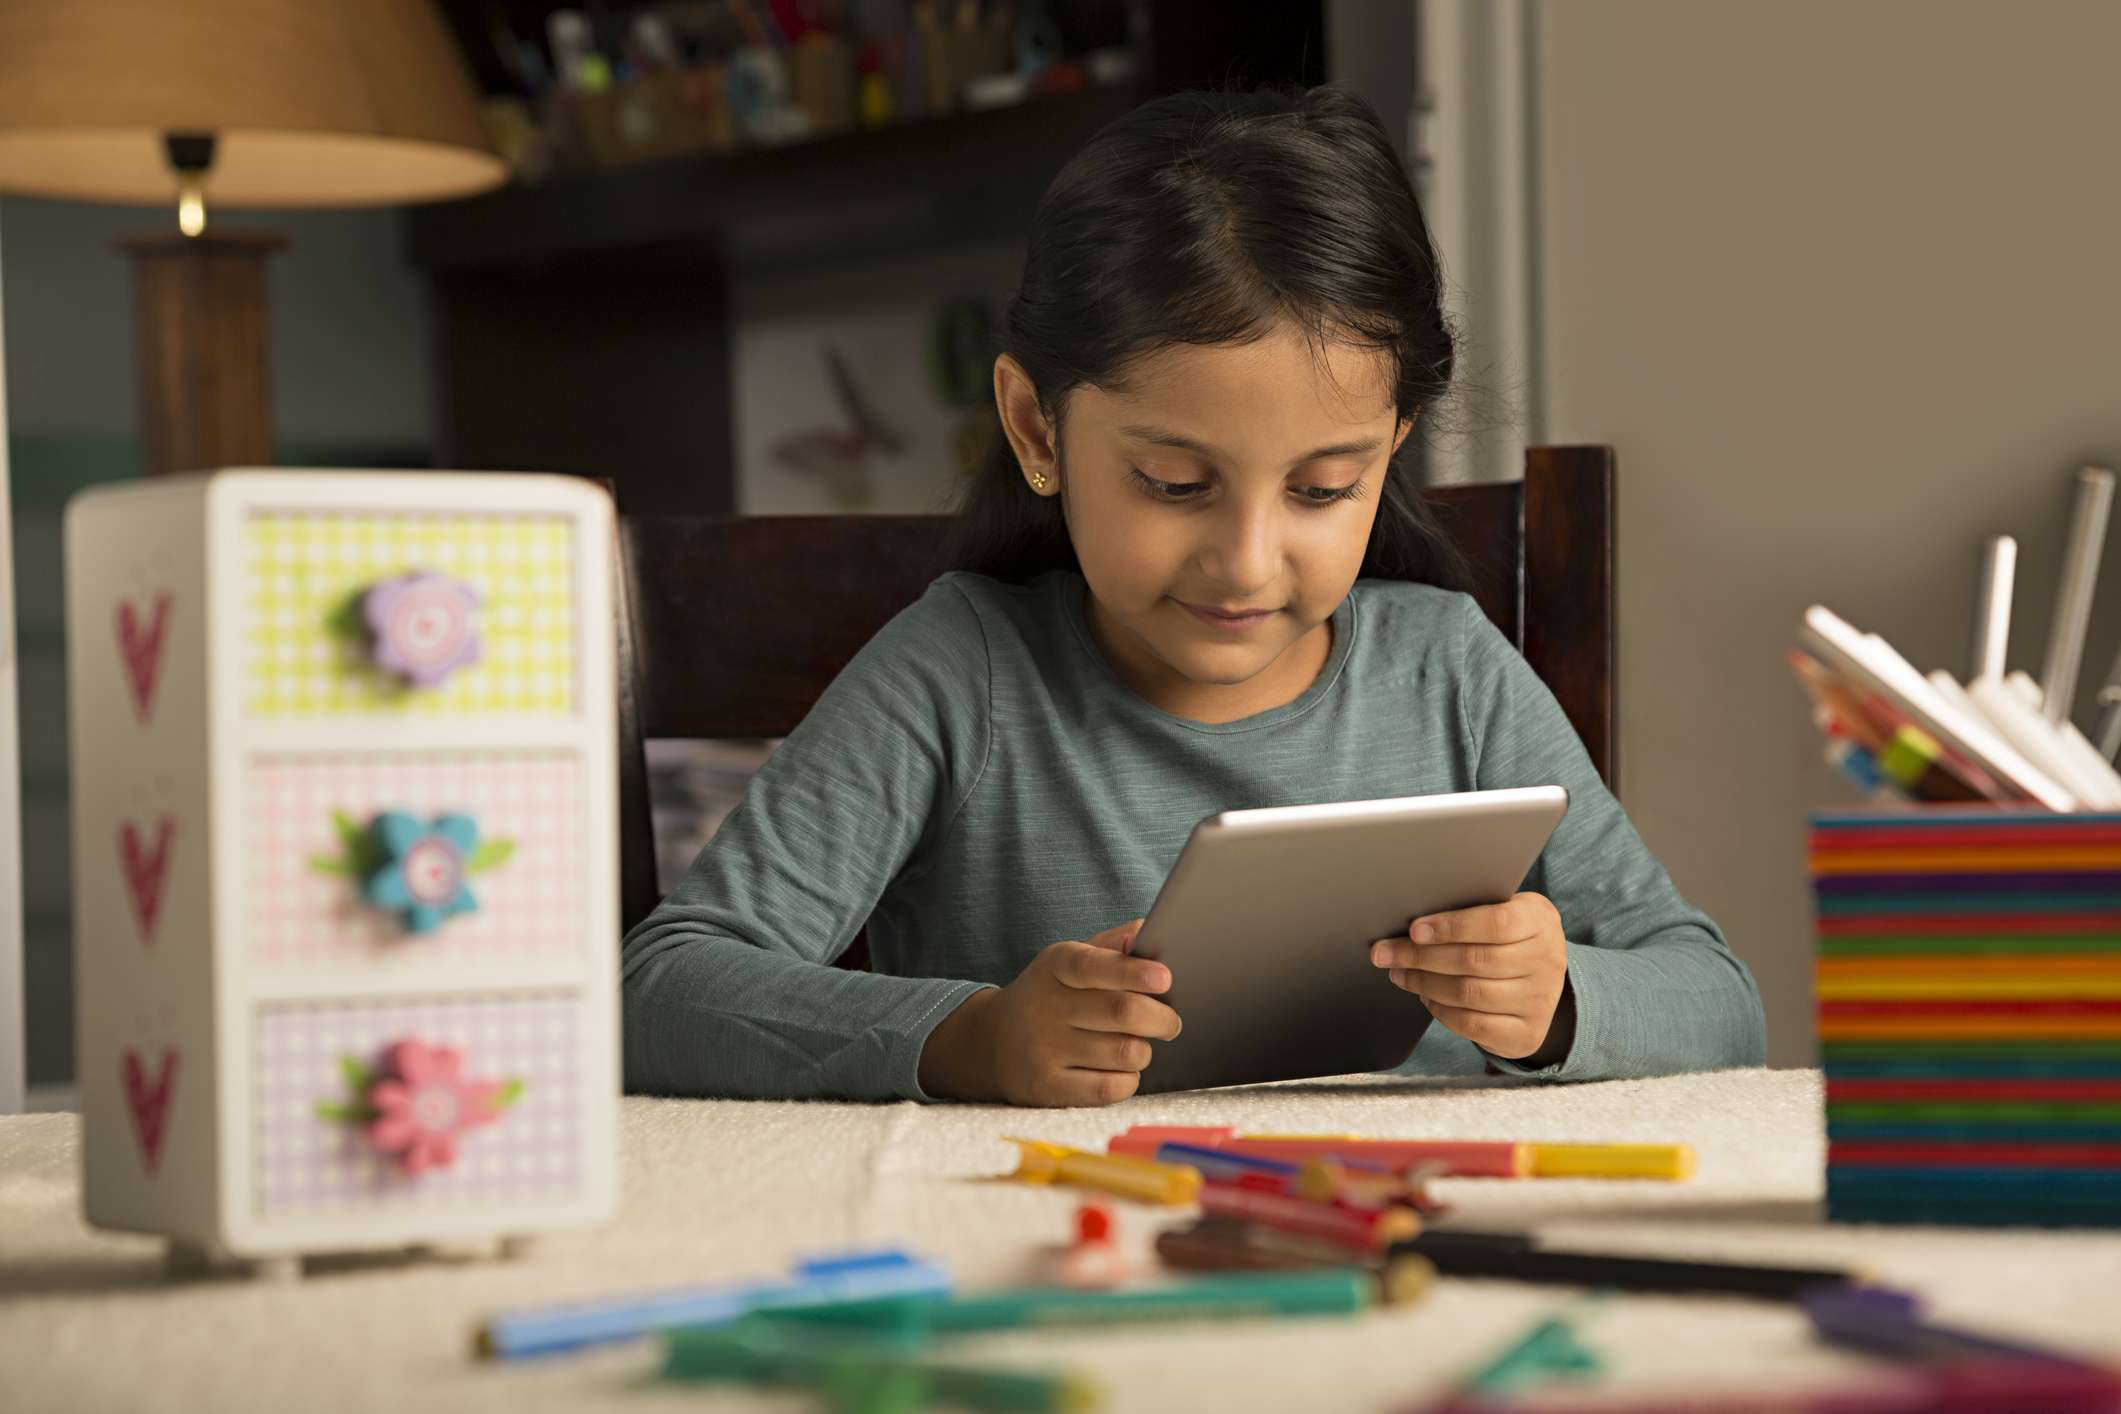 TALi's remote learning will help your child